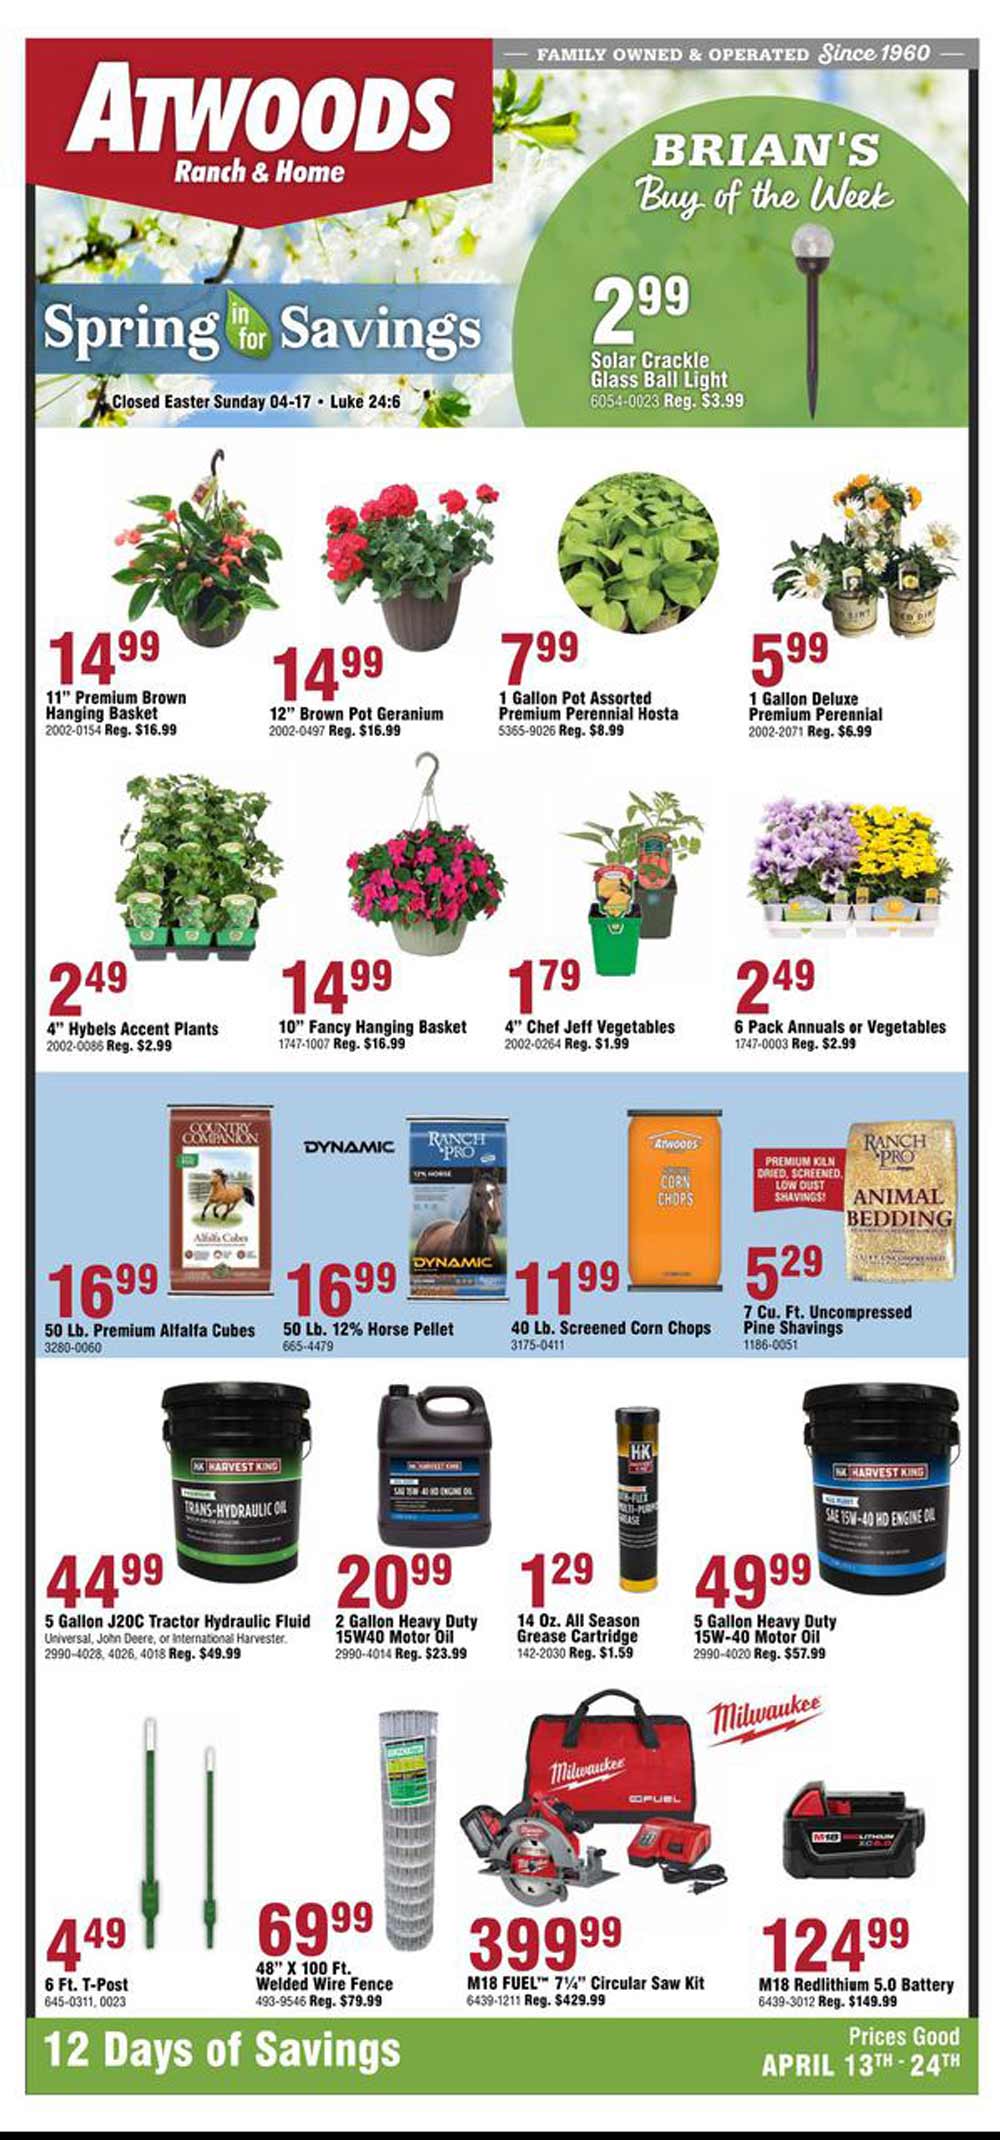 Atwoods Weekly ad (4/13/2022-4/24/2022)